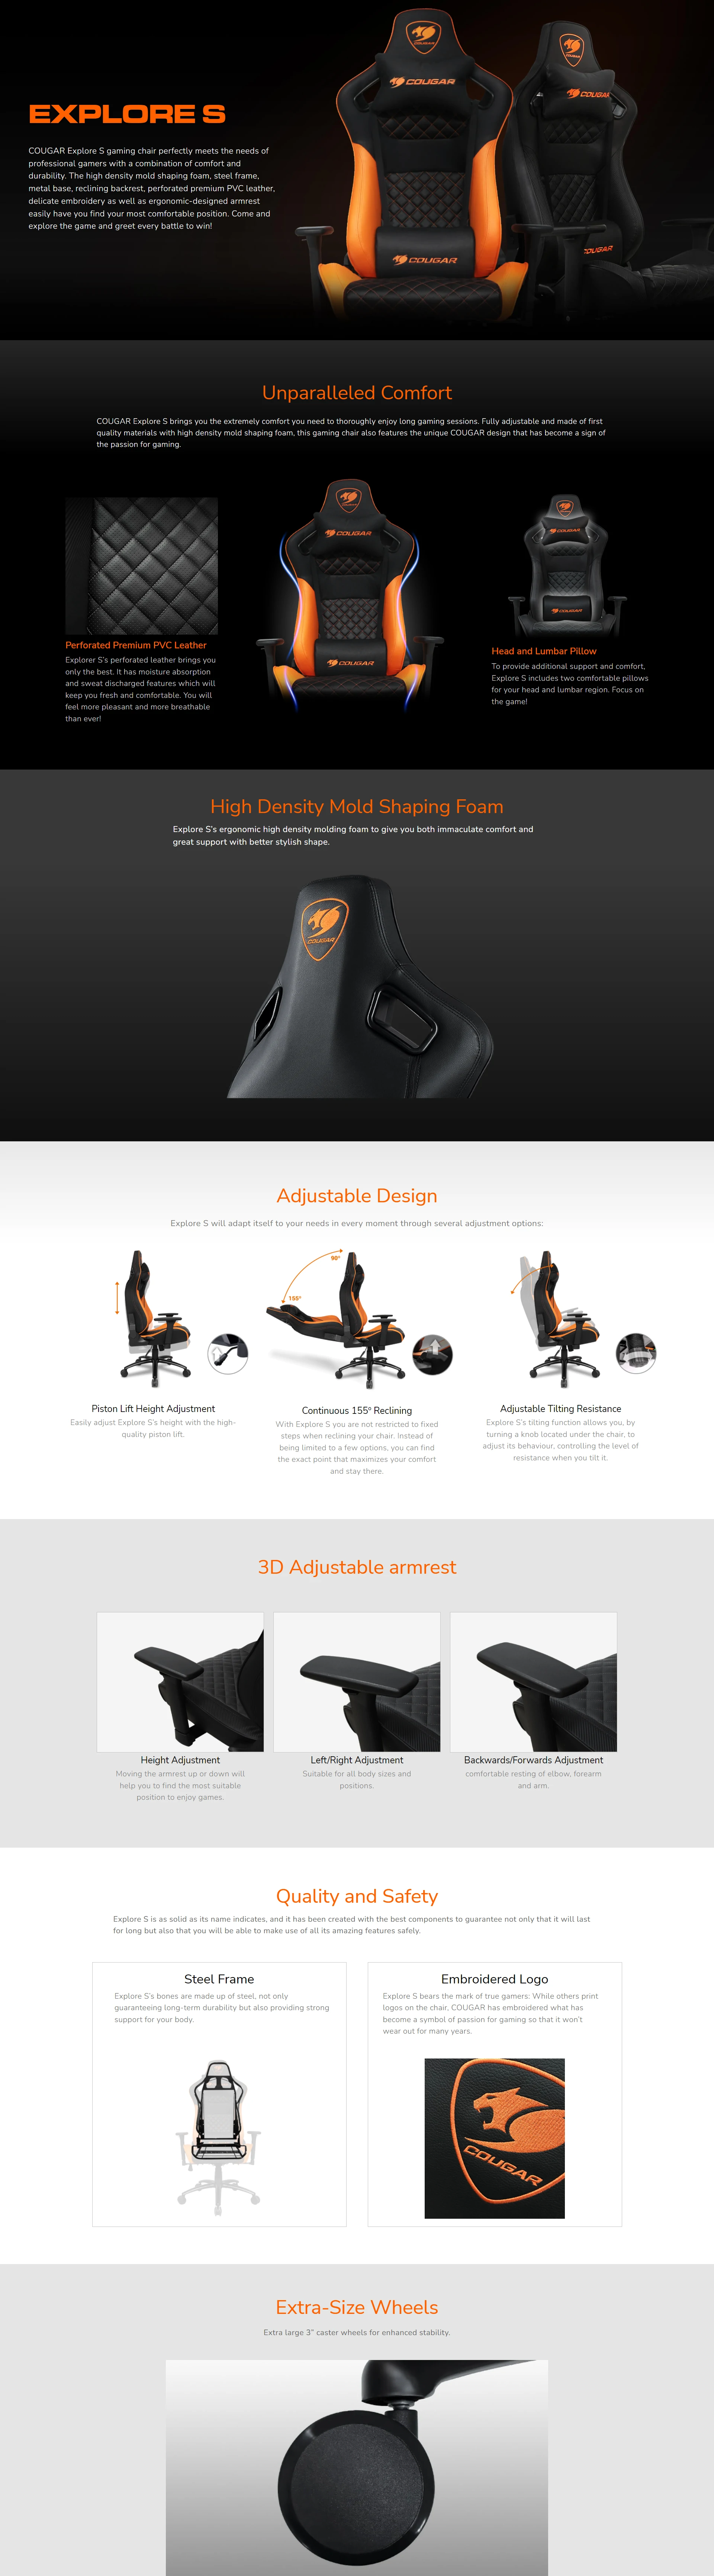 Overview - Cougar - Explore S Gaming Chair